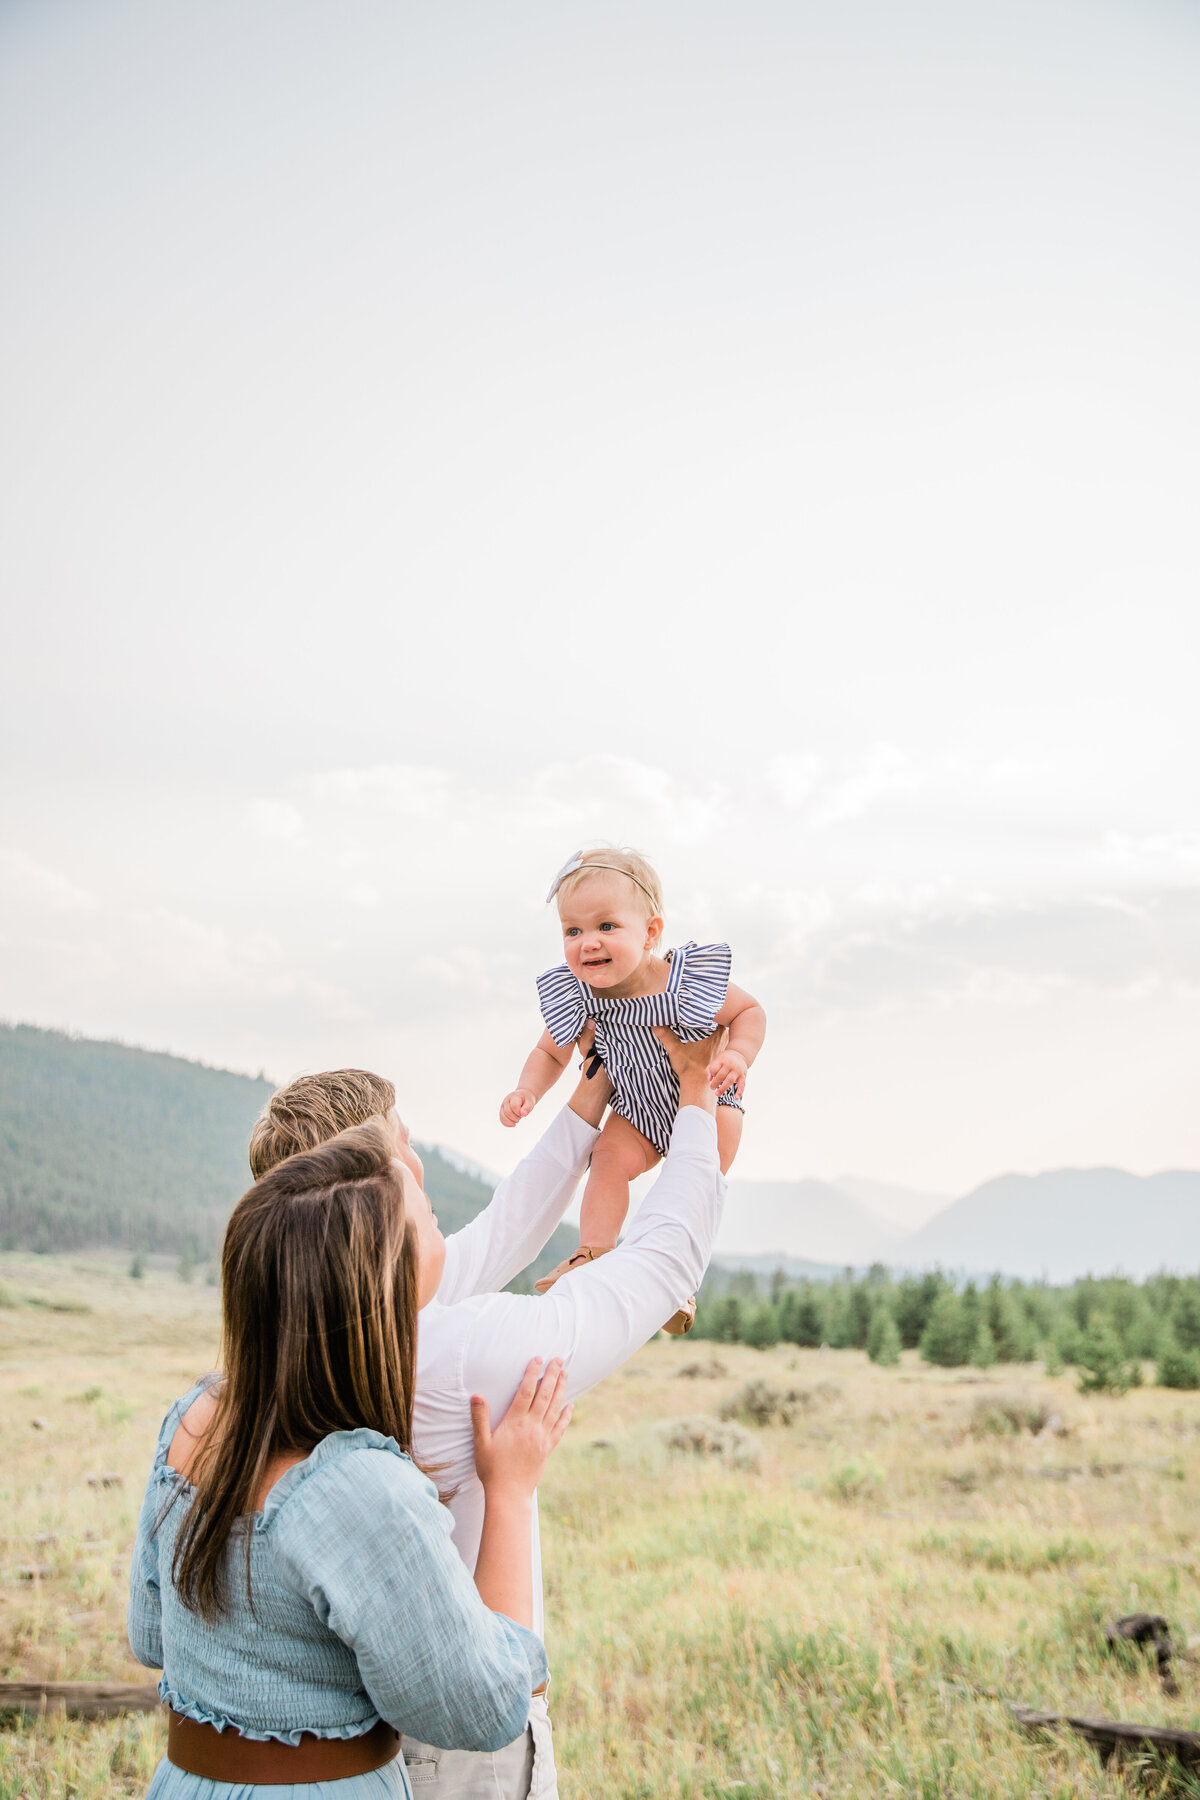 Two parents are standing close together while they hold their young baby high above their heads in a playful swing. They are in a grassy meadow with mountains behind them.